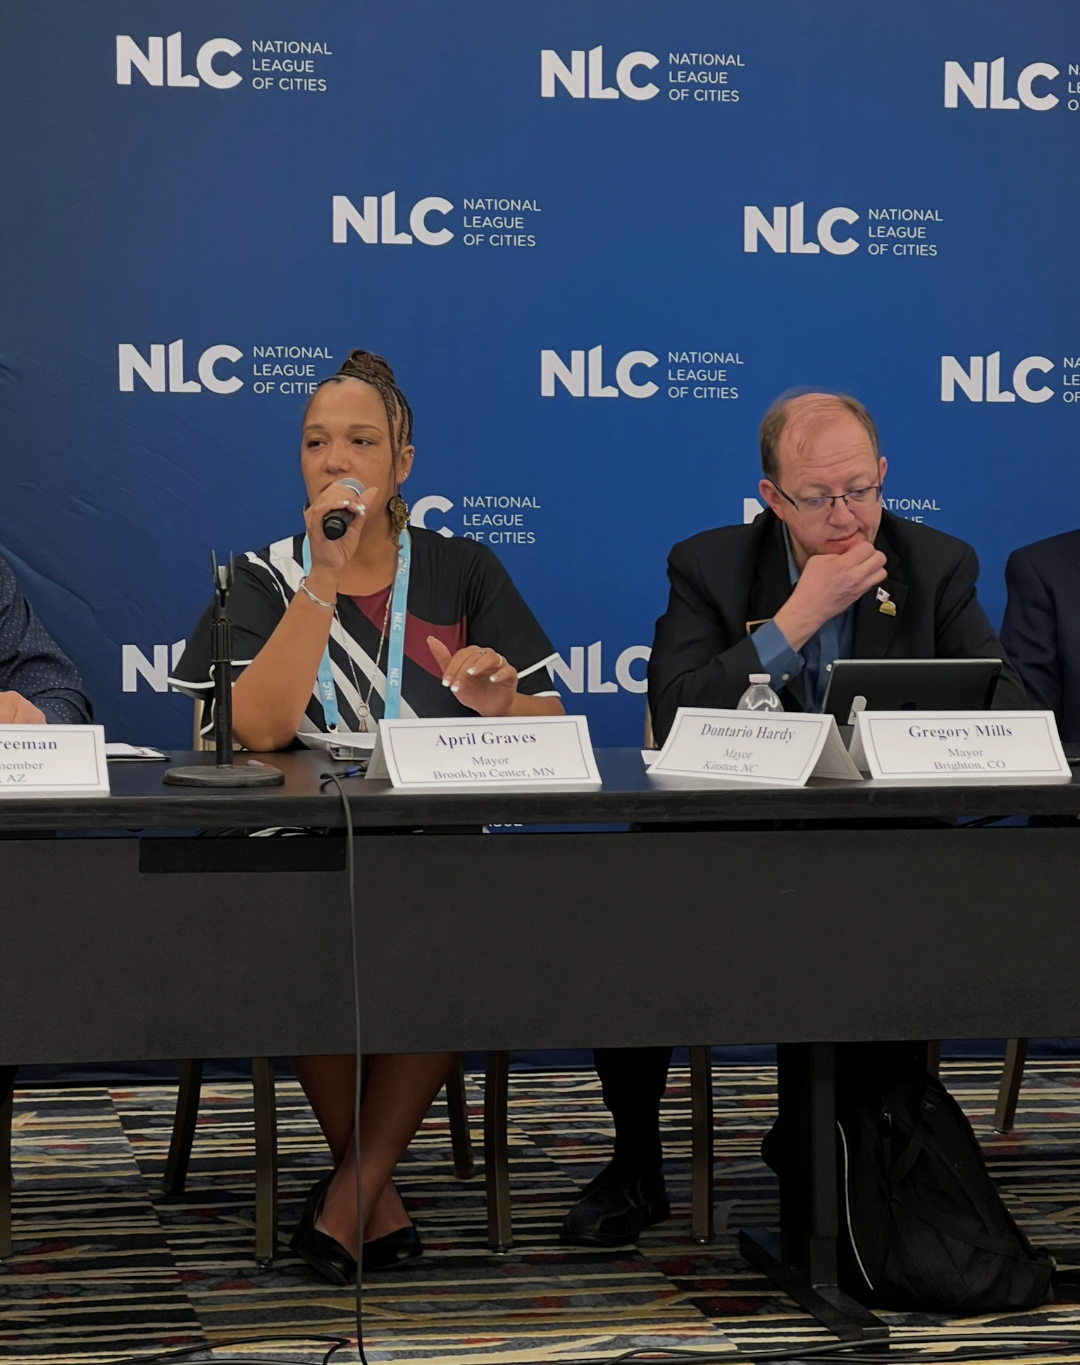 Brooklyn Center Mayor April Graves recently spoke as part of a panel during the National League of Cities conference in Washington, D.C.